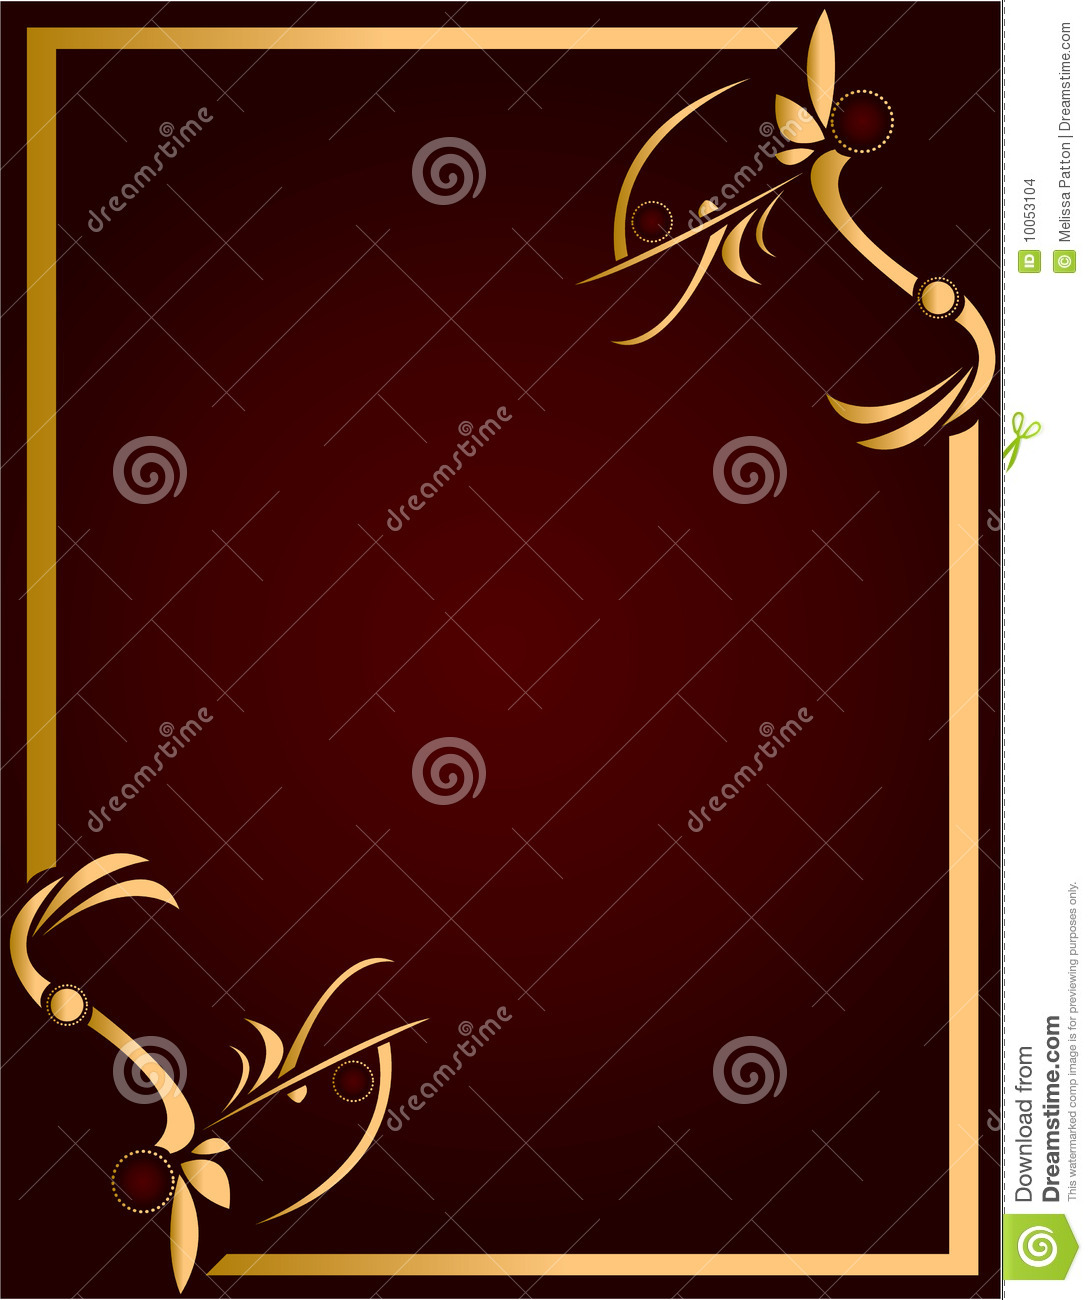 Gold Abstract Design On A Burgundy Background With Space For Copy